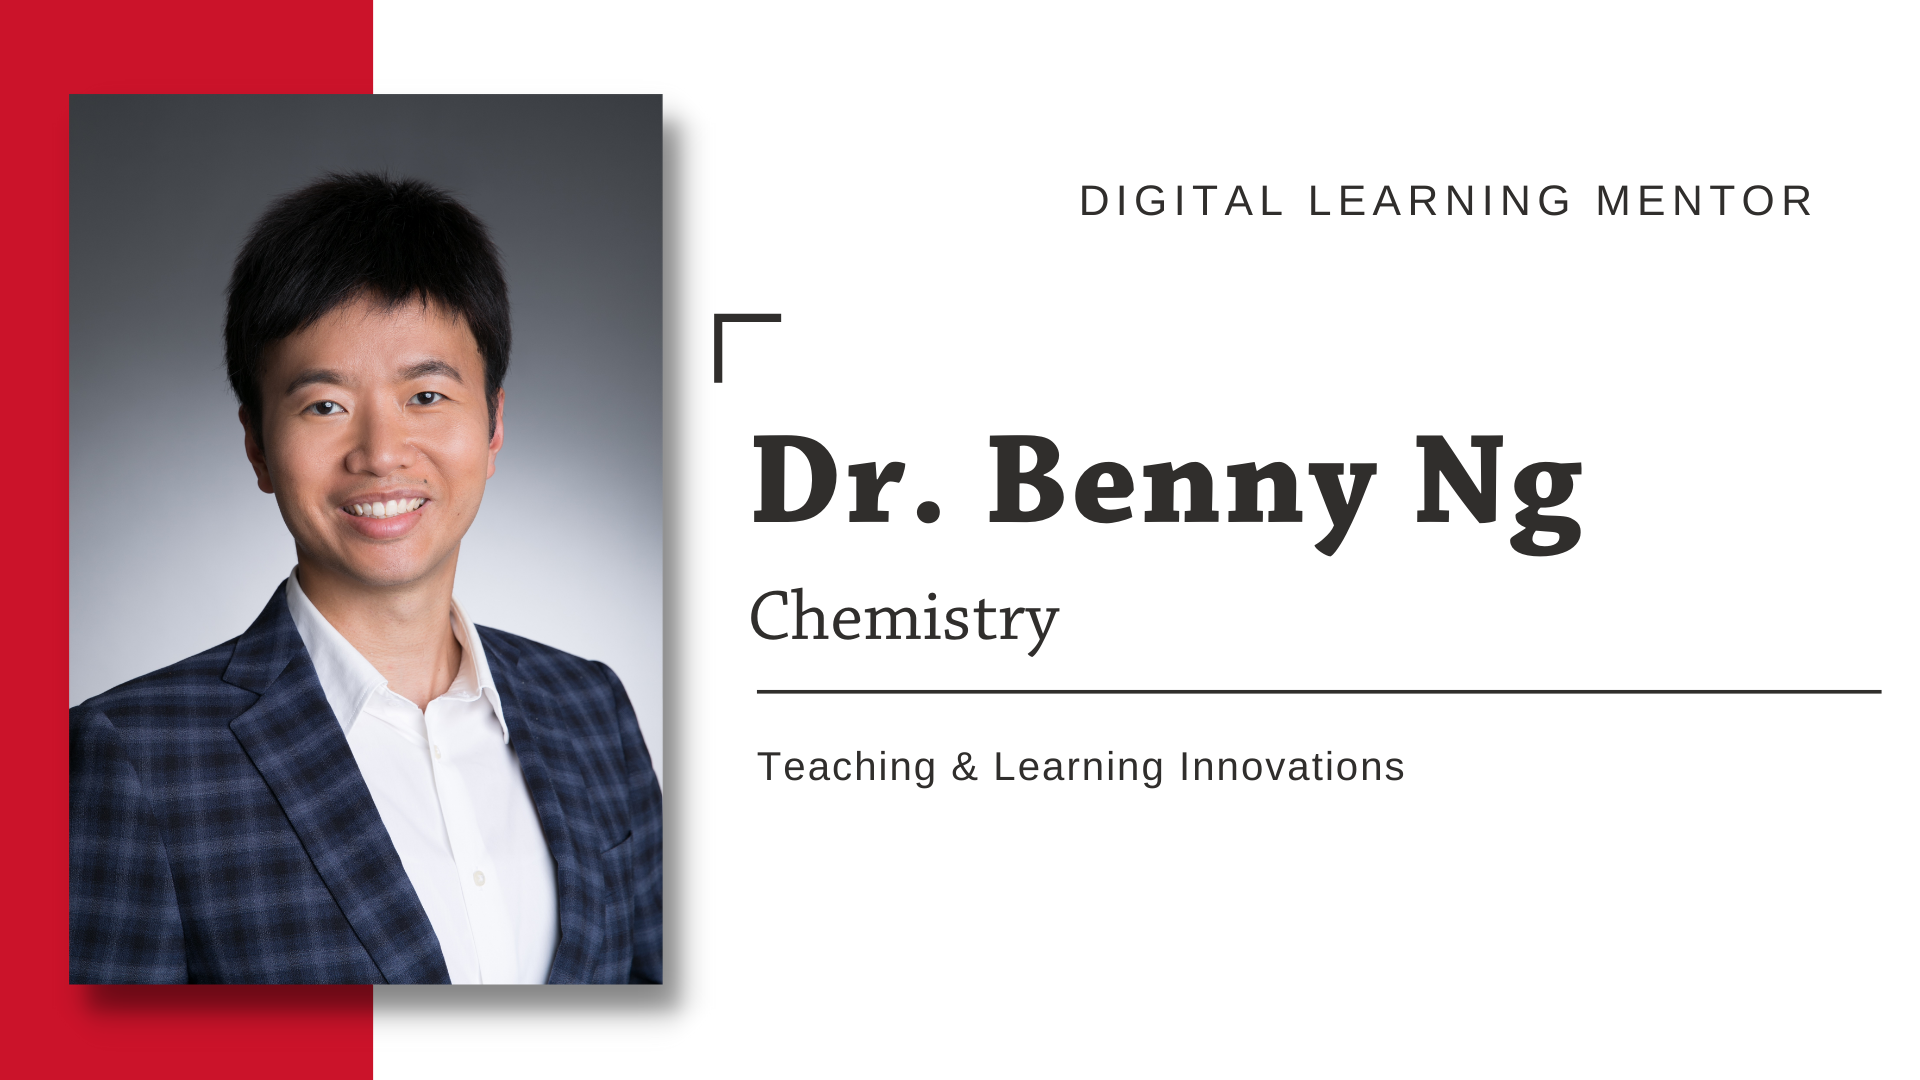 Benny Ng DLM video introduction